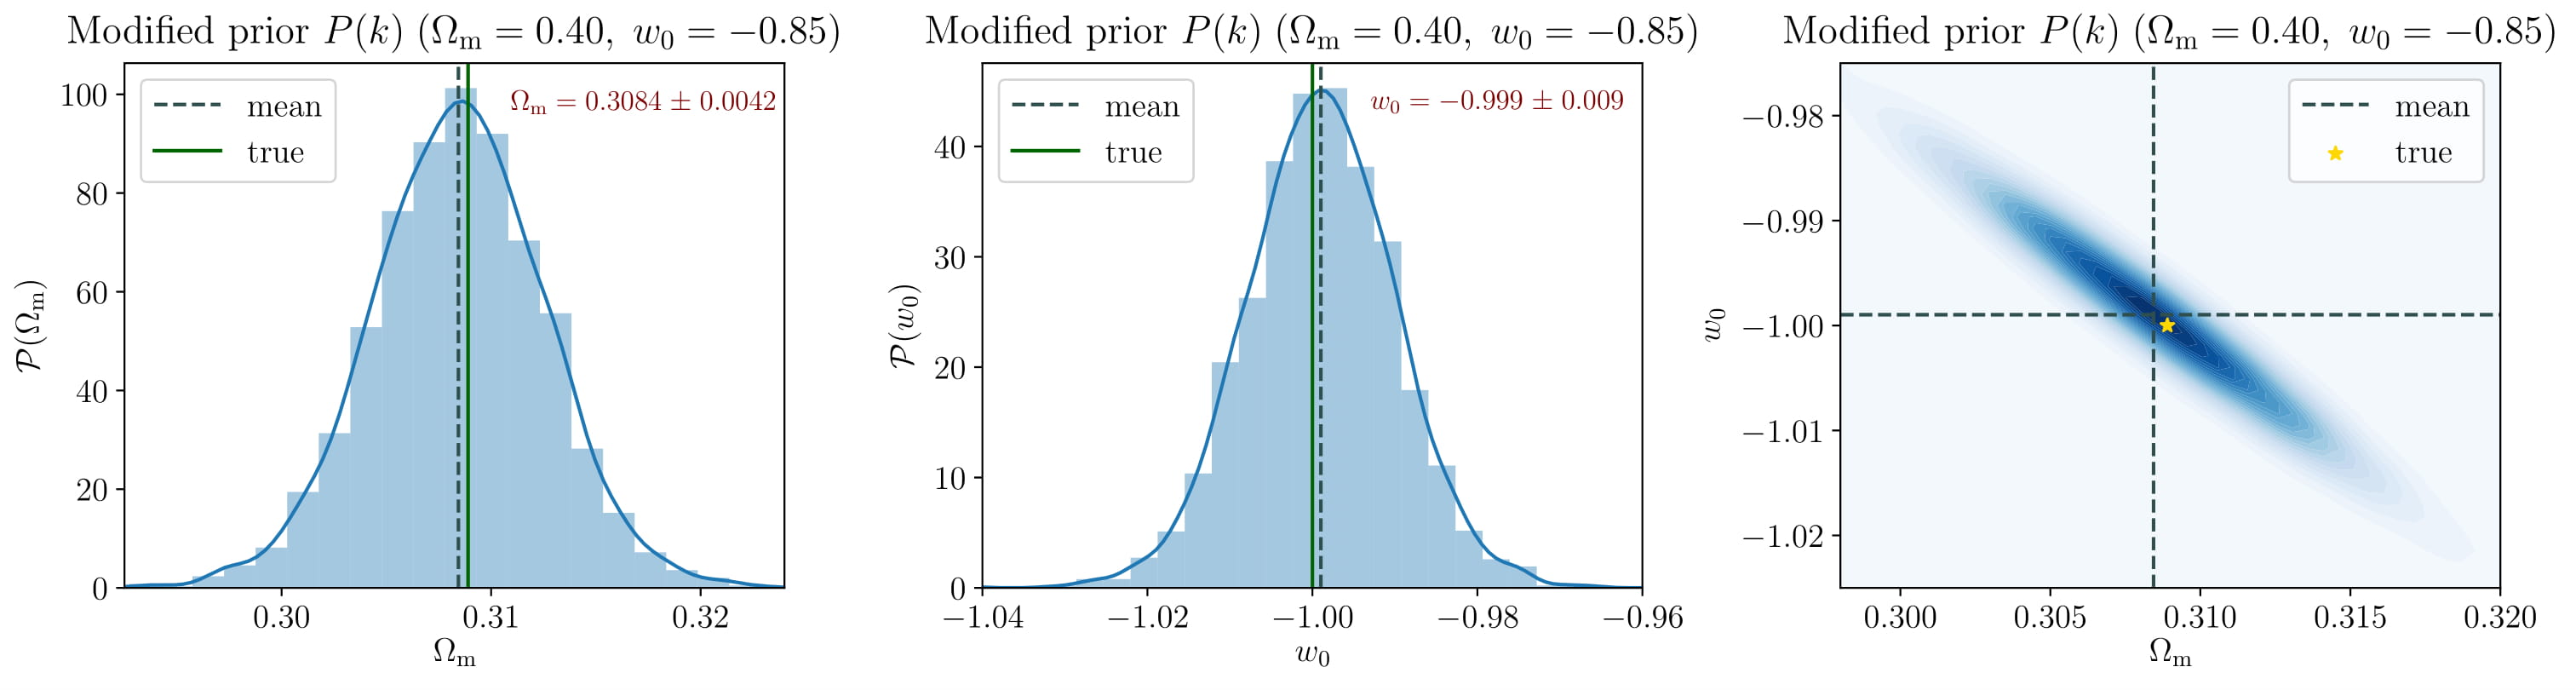 Cosmological constraints with modified prior